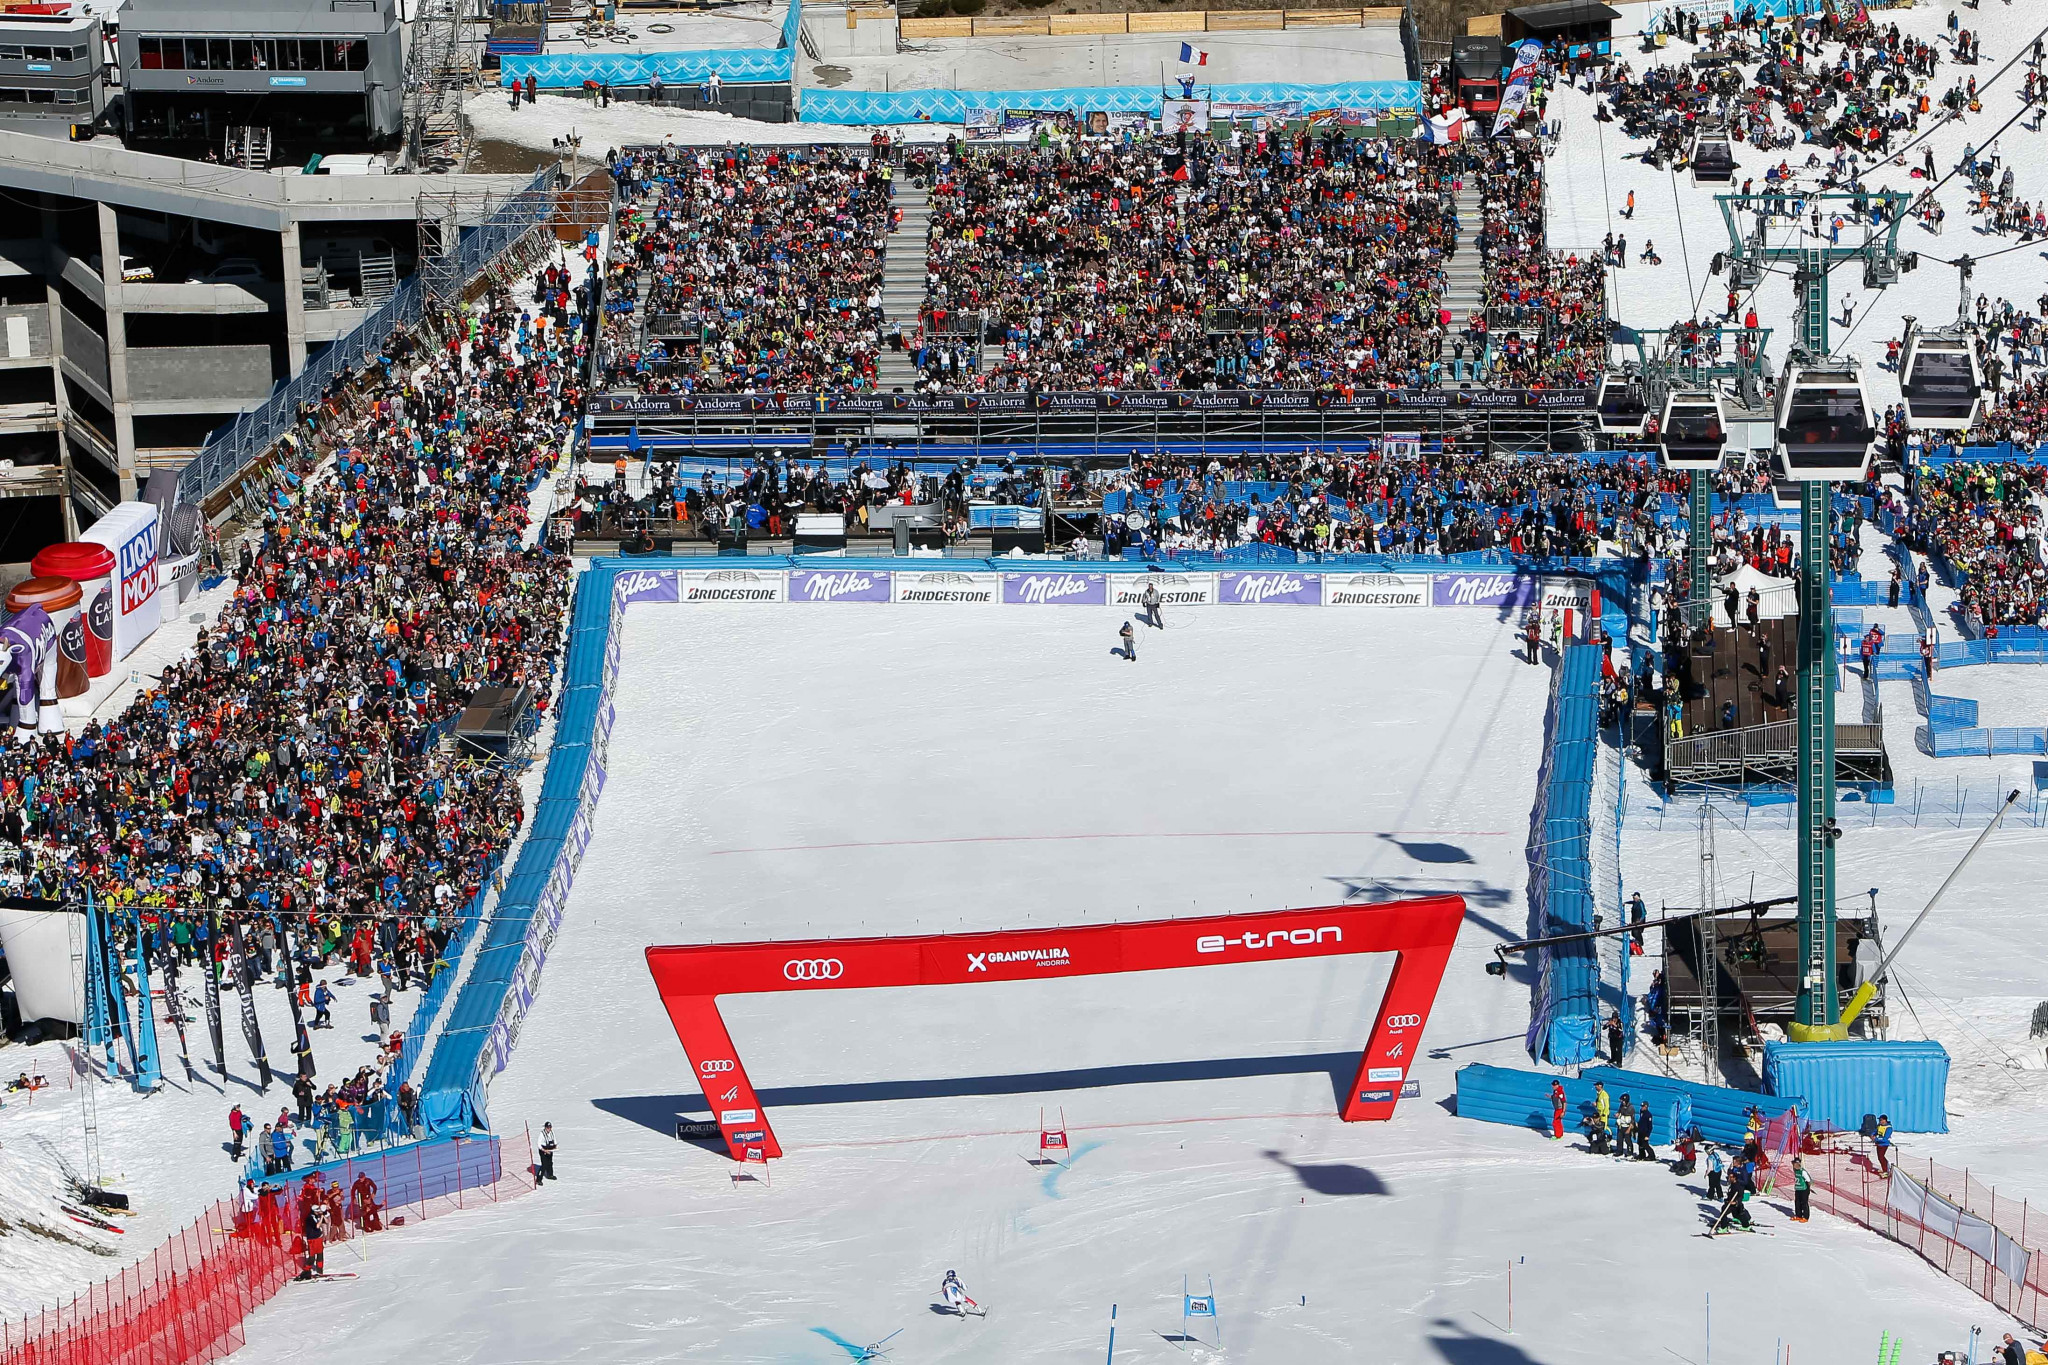 Soldeu will host the Alpine Skiing World Cup finals in 2023 ©Getty Images